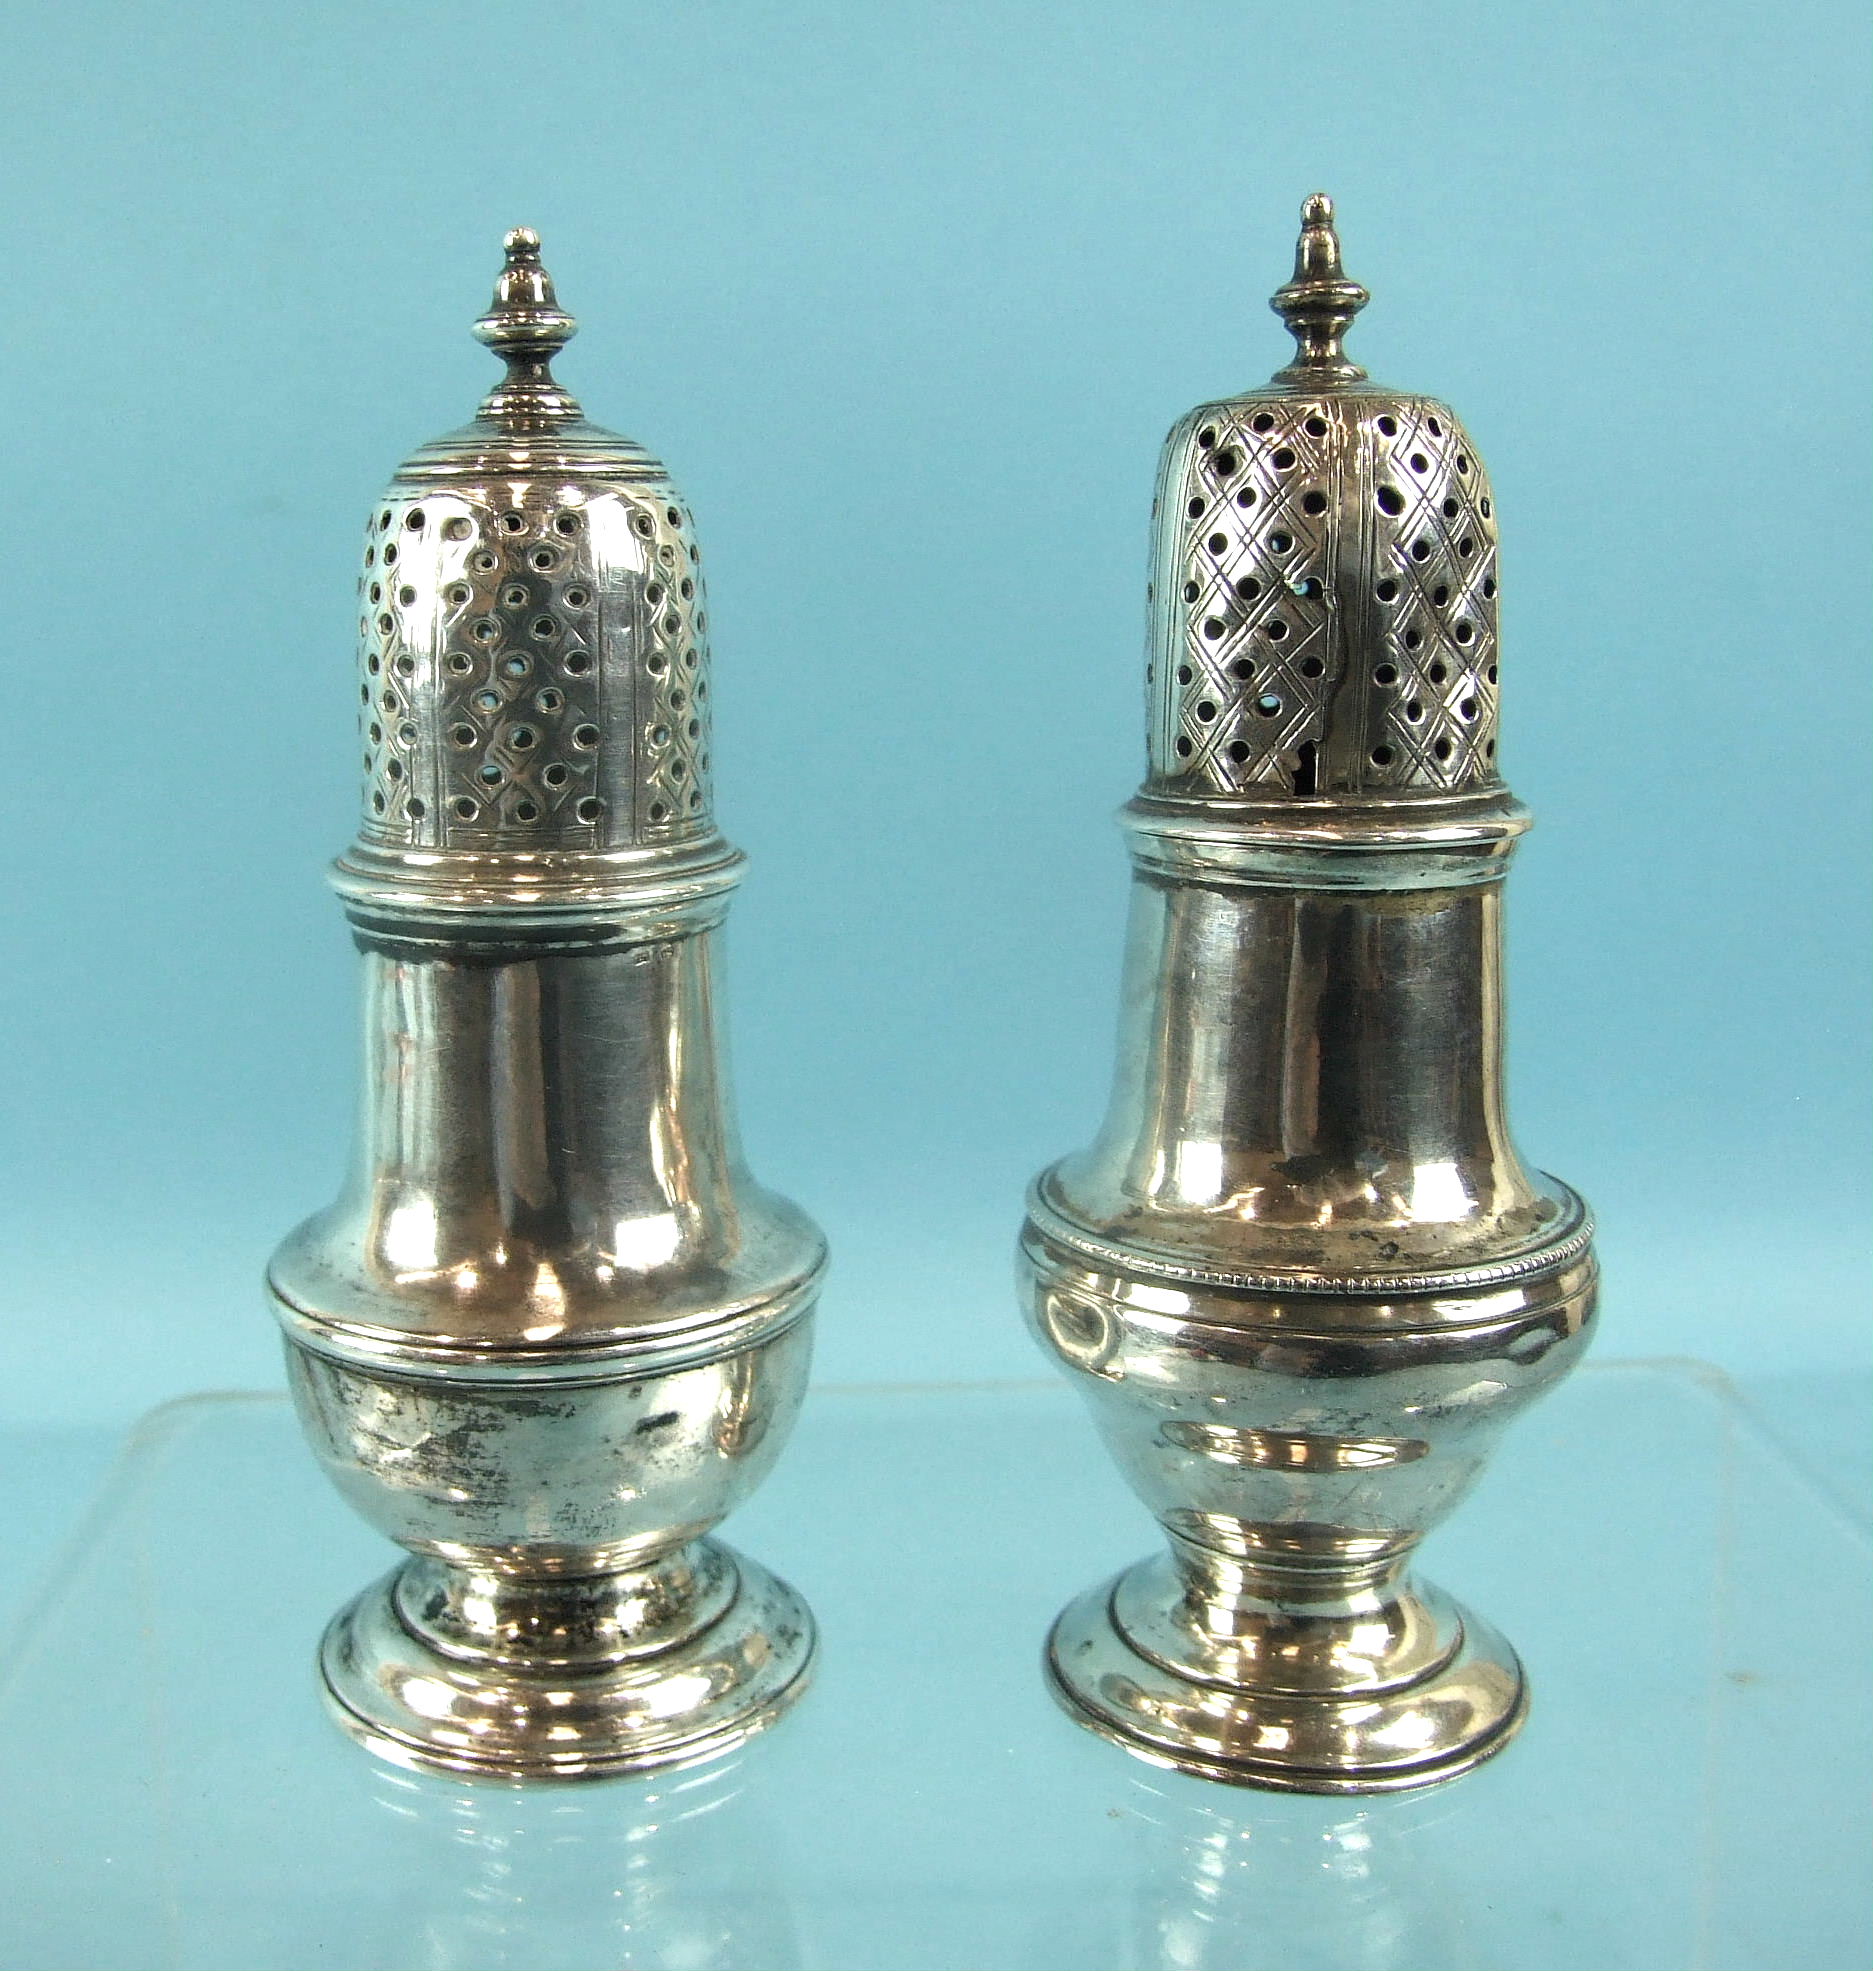 Two Georgian pepper castors of baluster form, 1747 and 1767, one with damaged lid, 12cm high, (2).